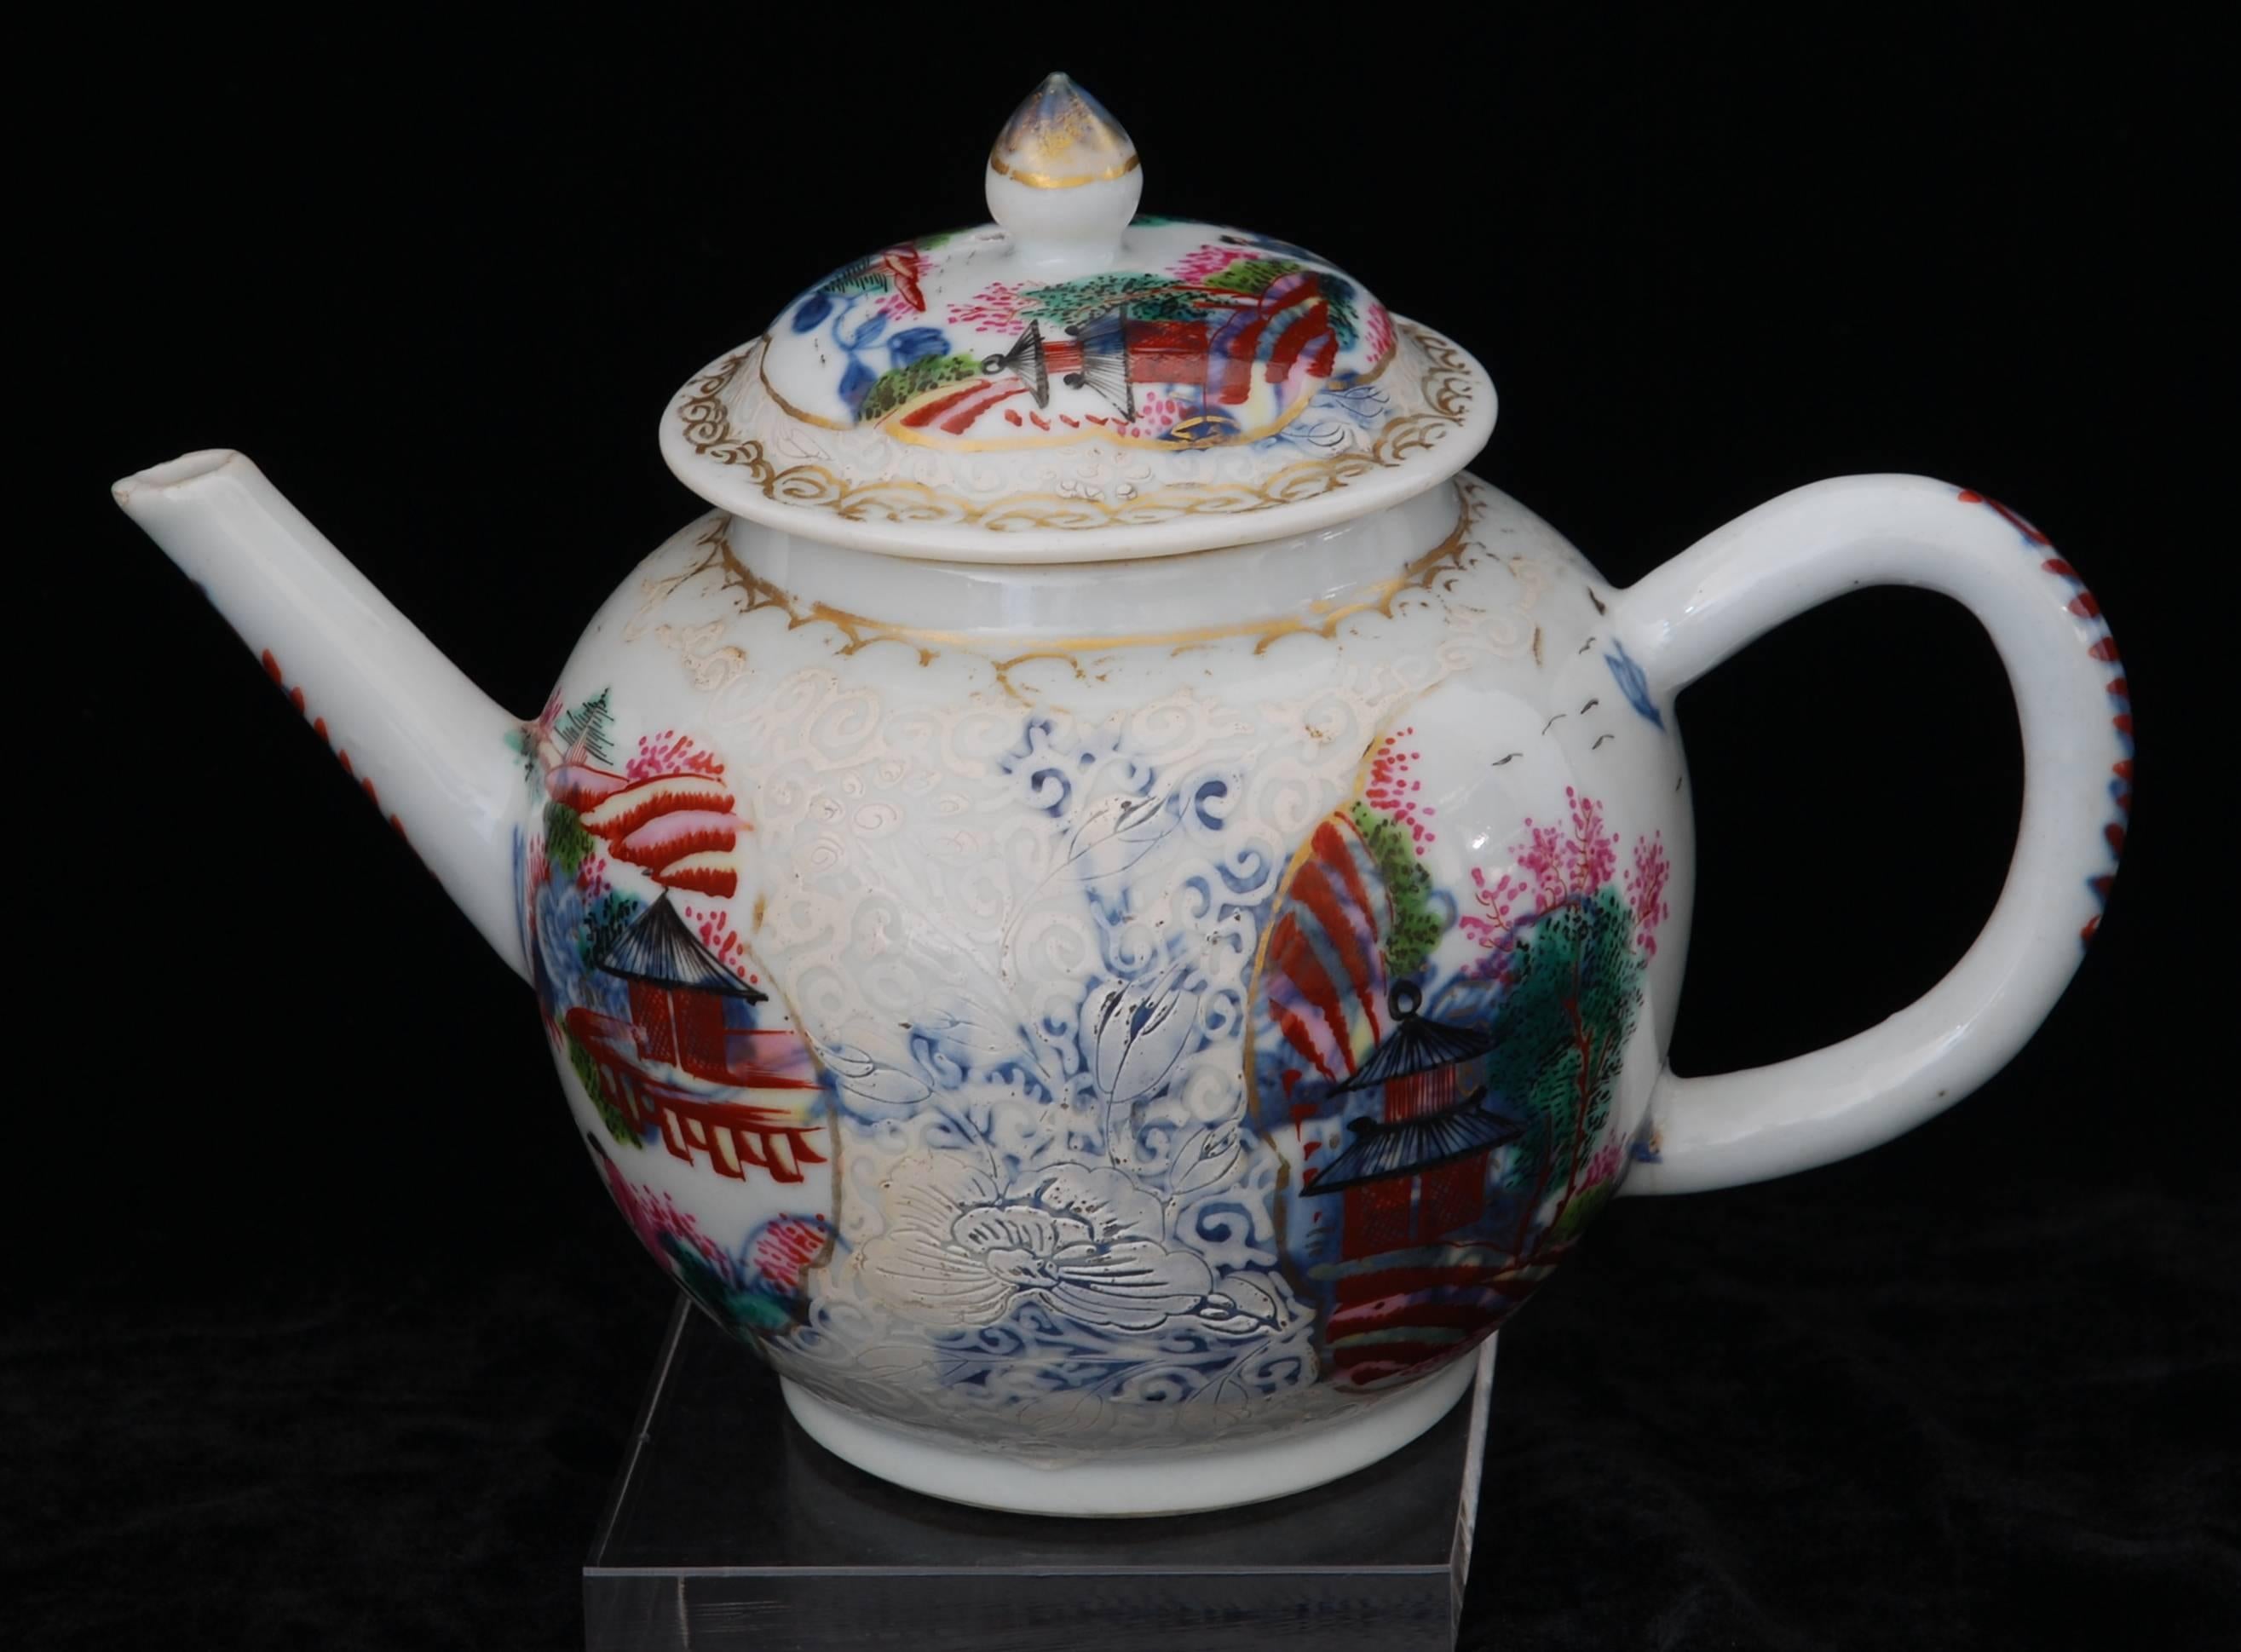 Chinese export porcelain teapot with underglaze blue decoration; decorated for the London market in the James Giles workshop with the Stag Hunt pattern.

This pot takes us back to the start of the English porcelain trade, when the London